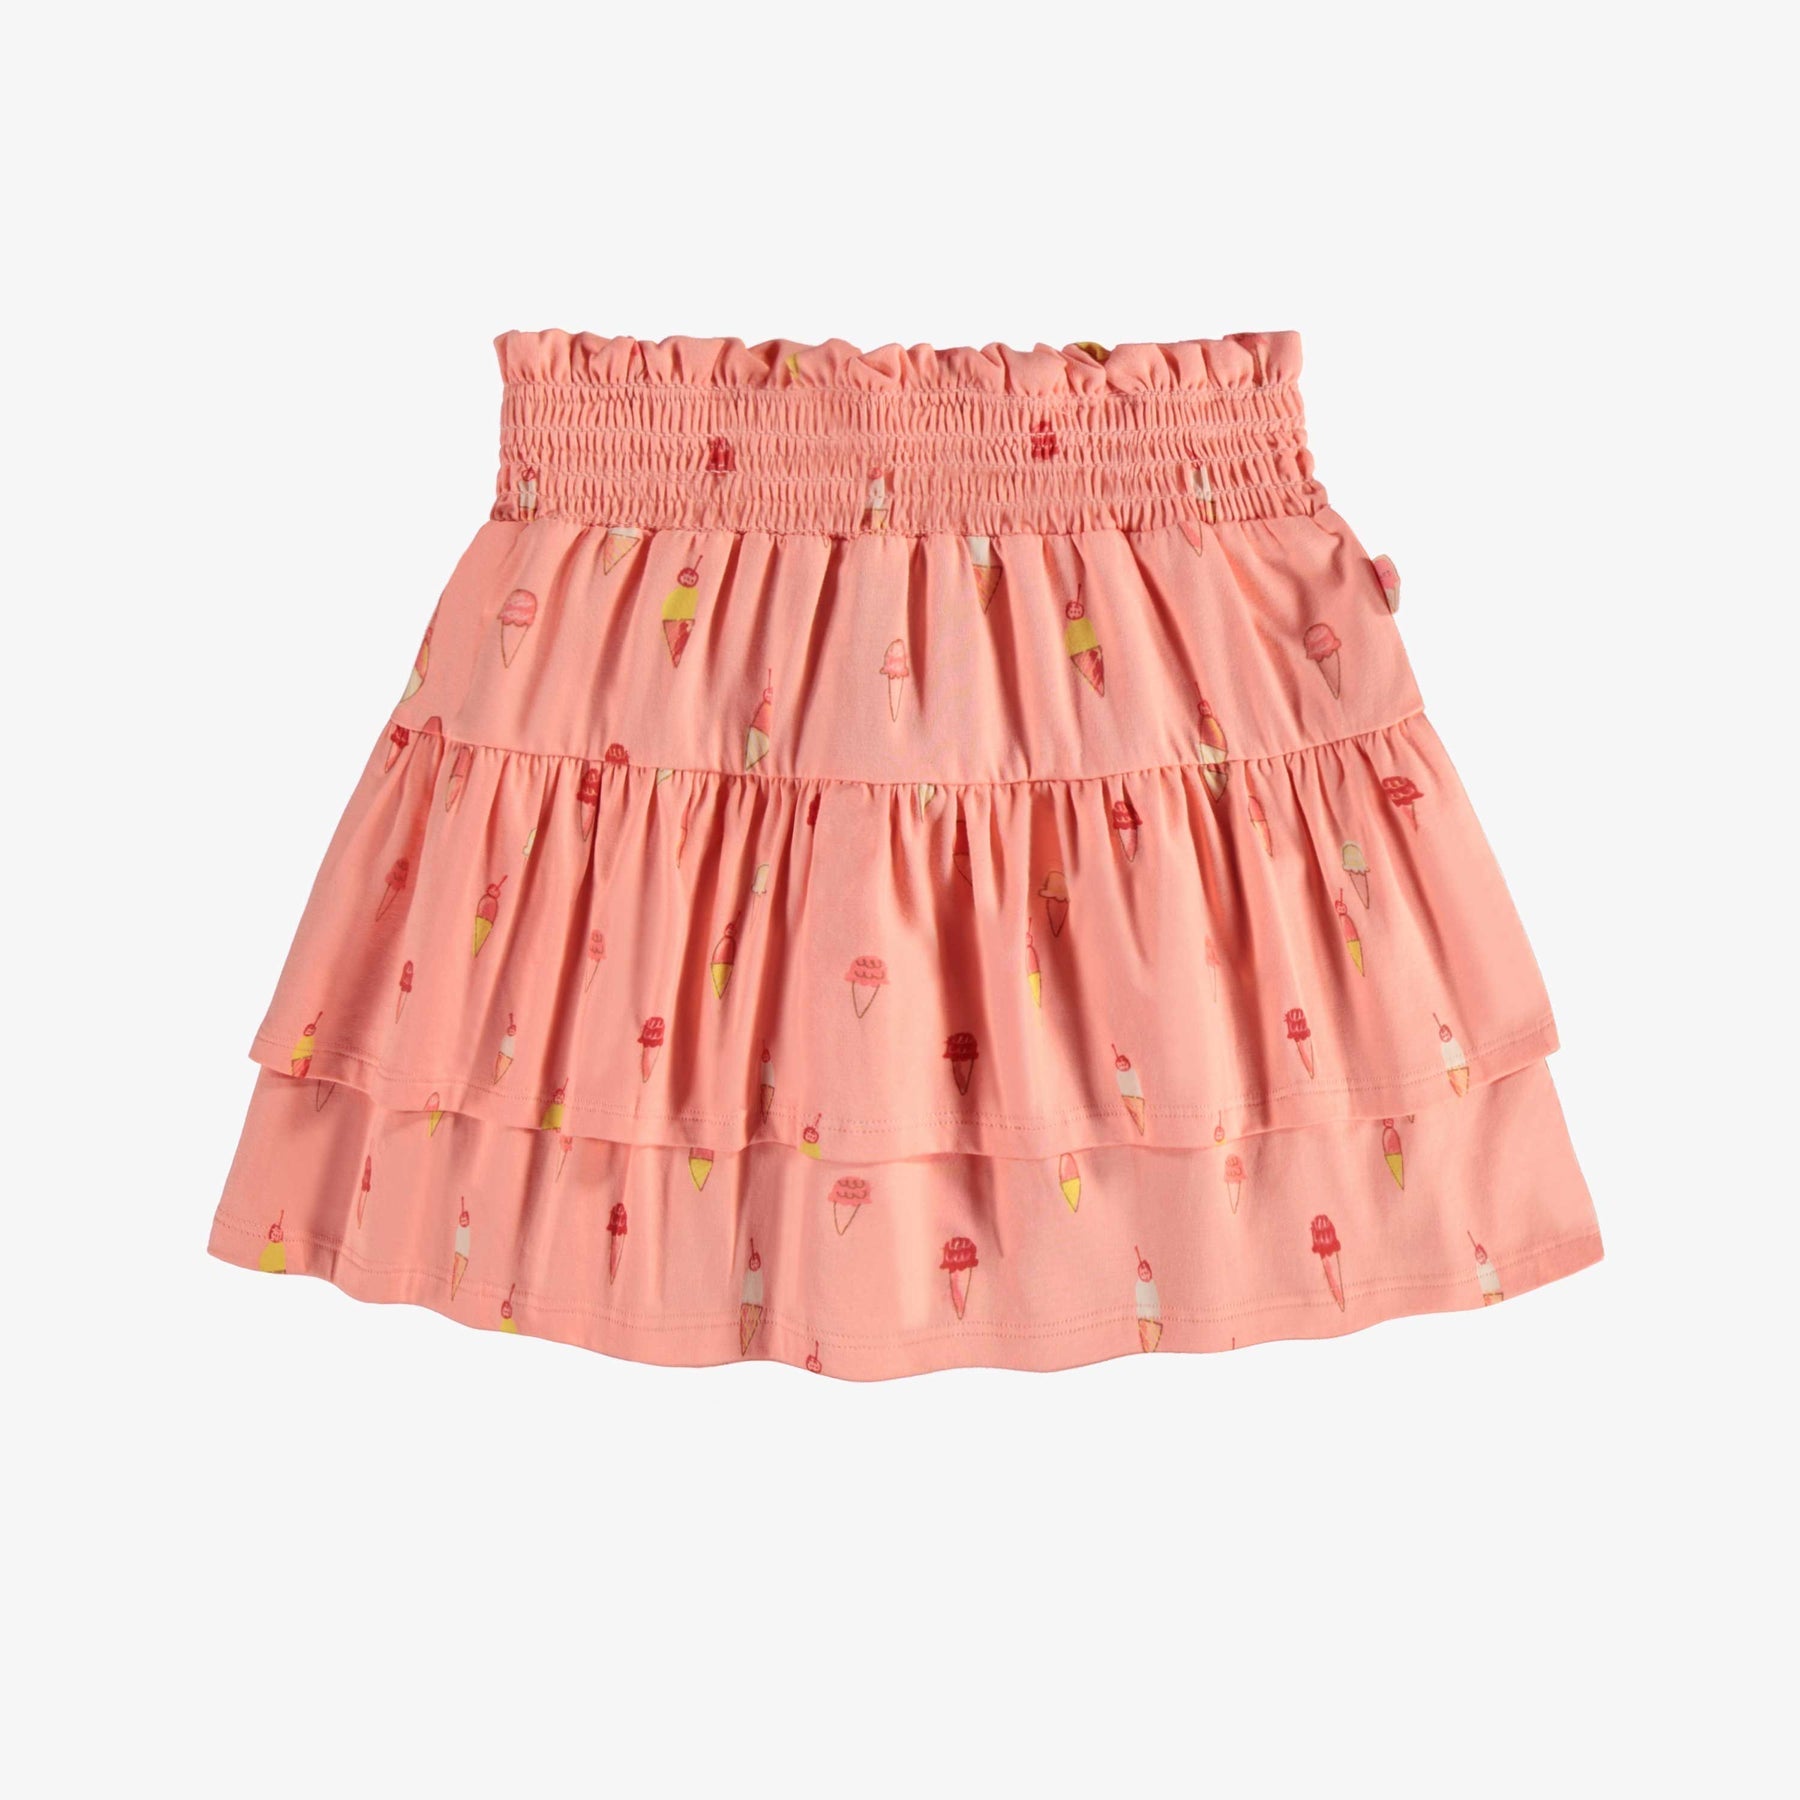 PINK SKIRT WITH RUFFLE AND AN ICE CREAM PRINT COTTON, CHILD